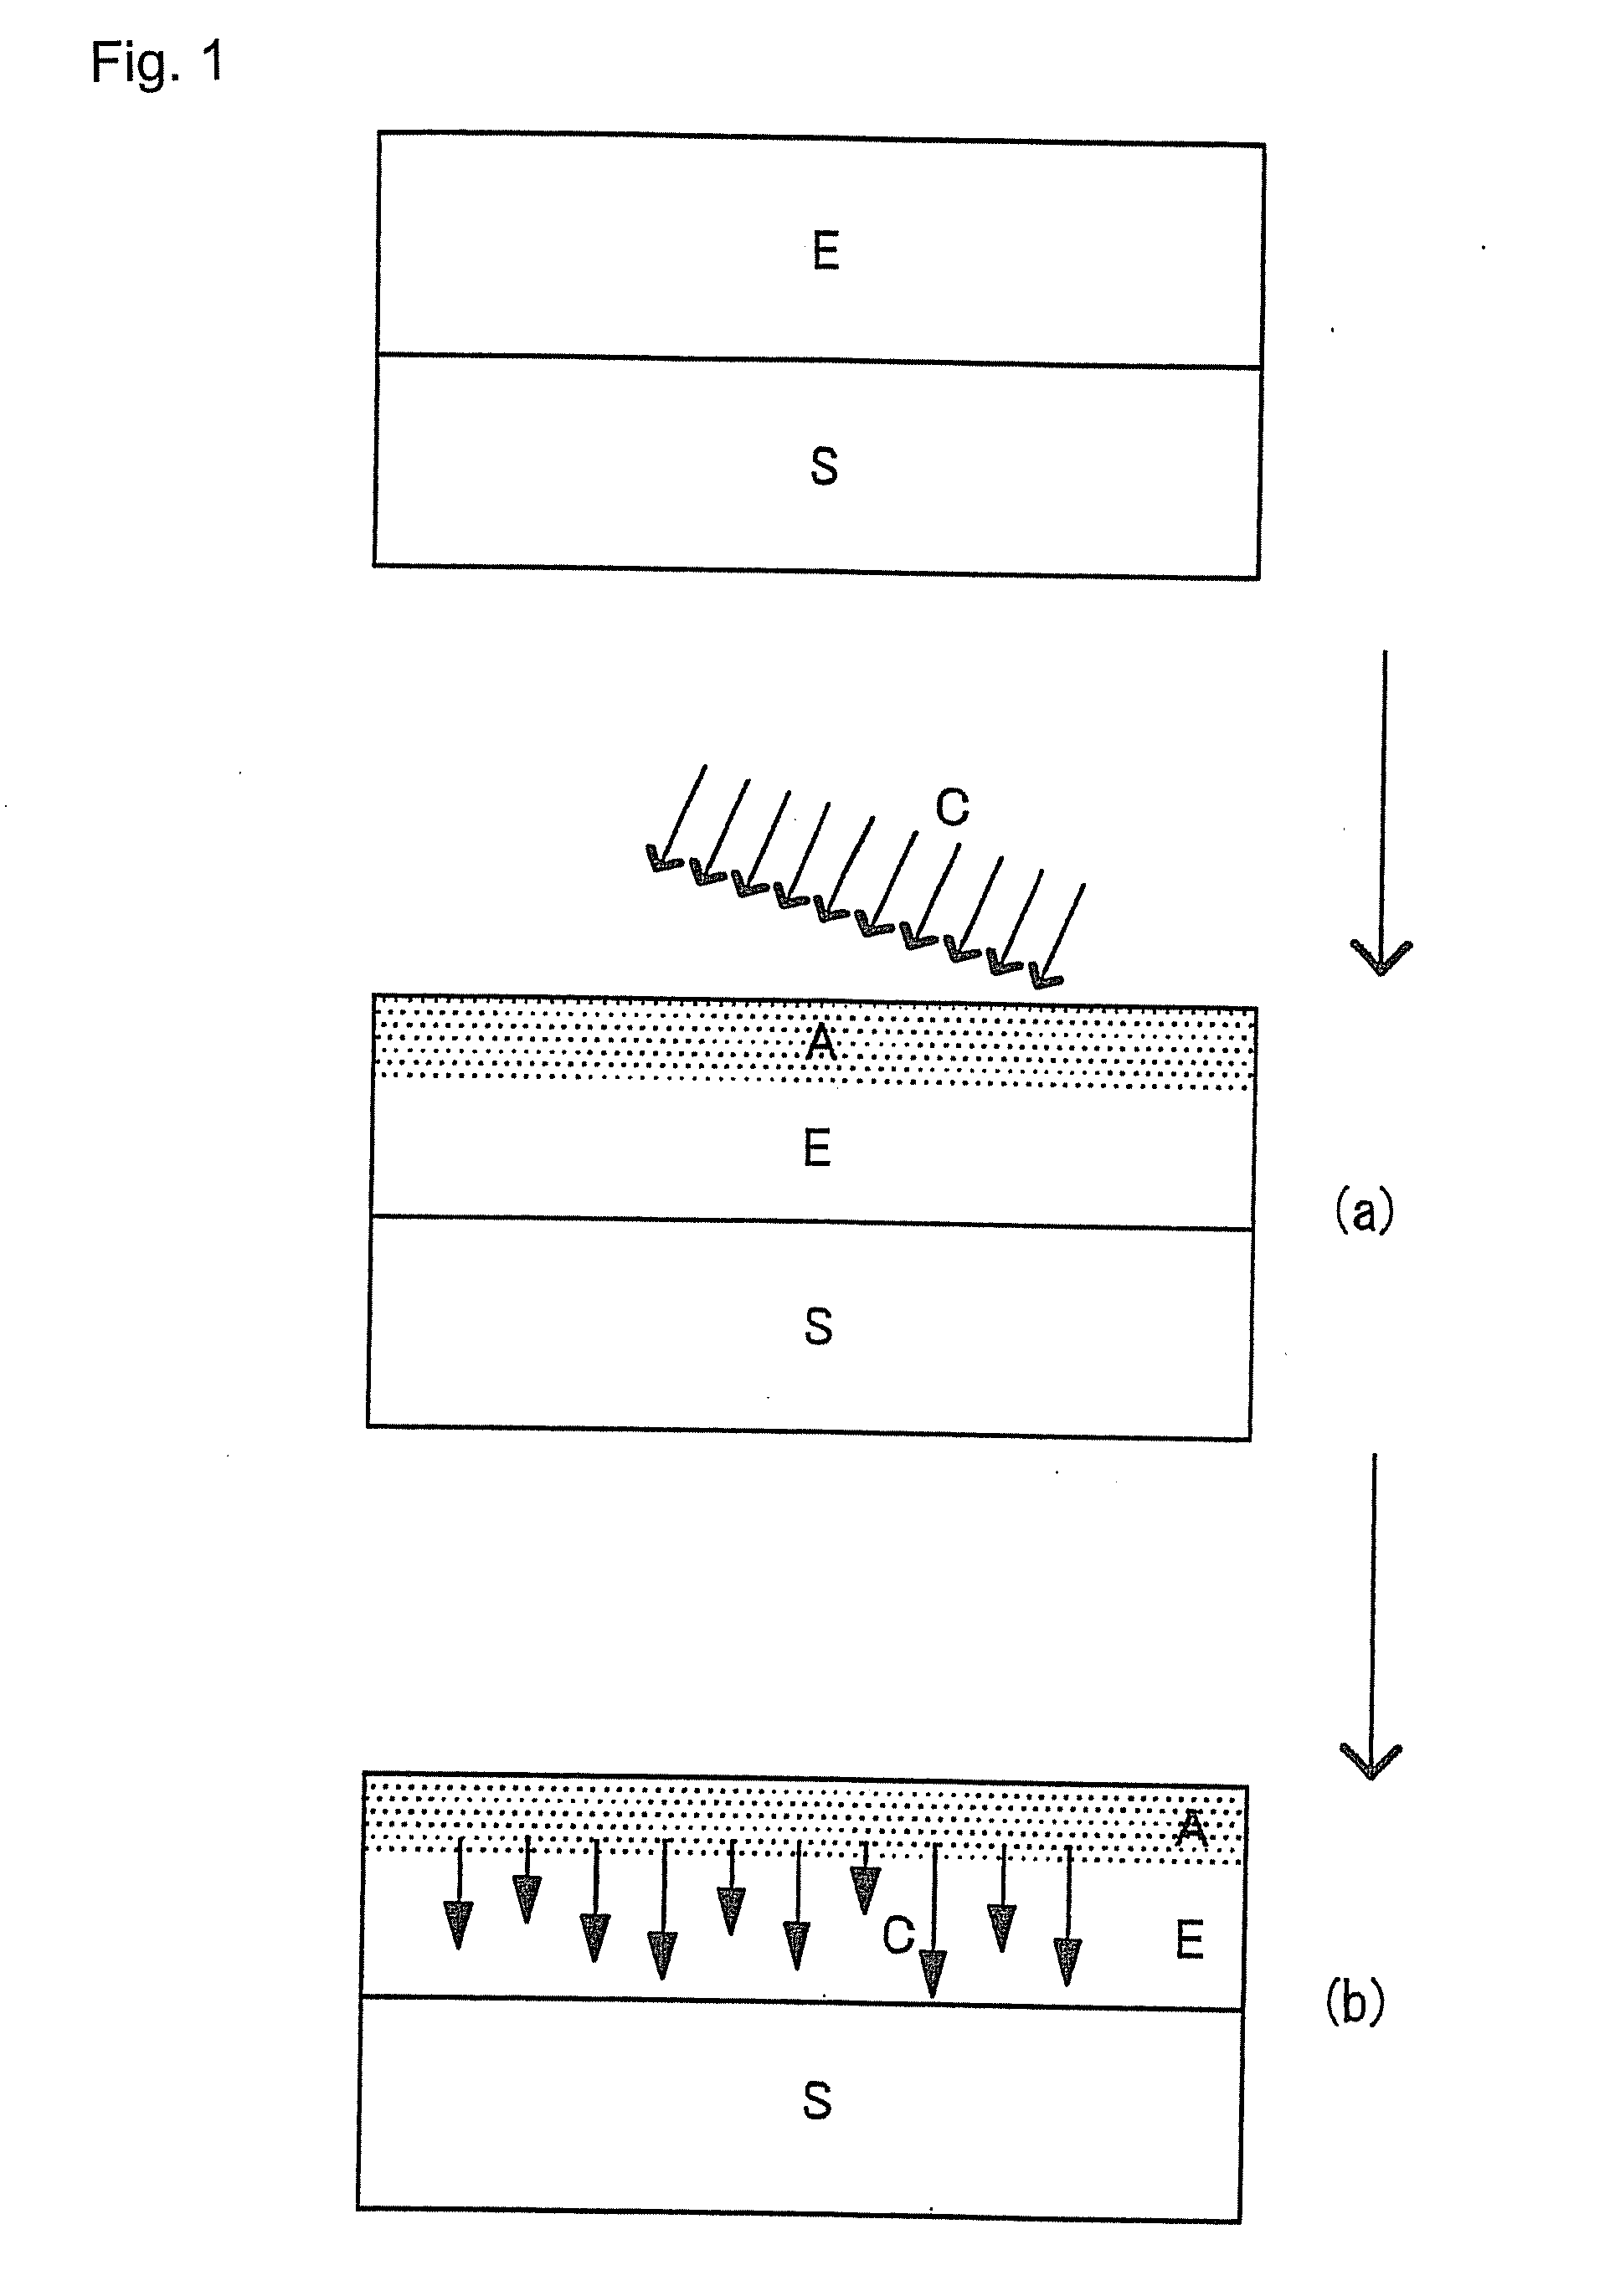 SiC Crystal Semiconductor Device